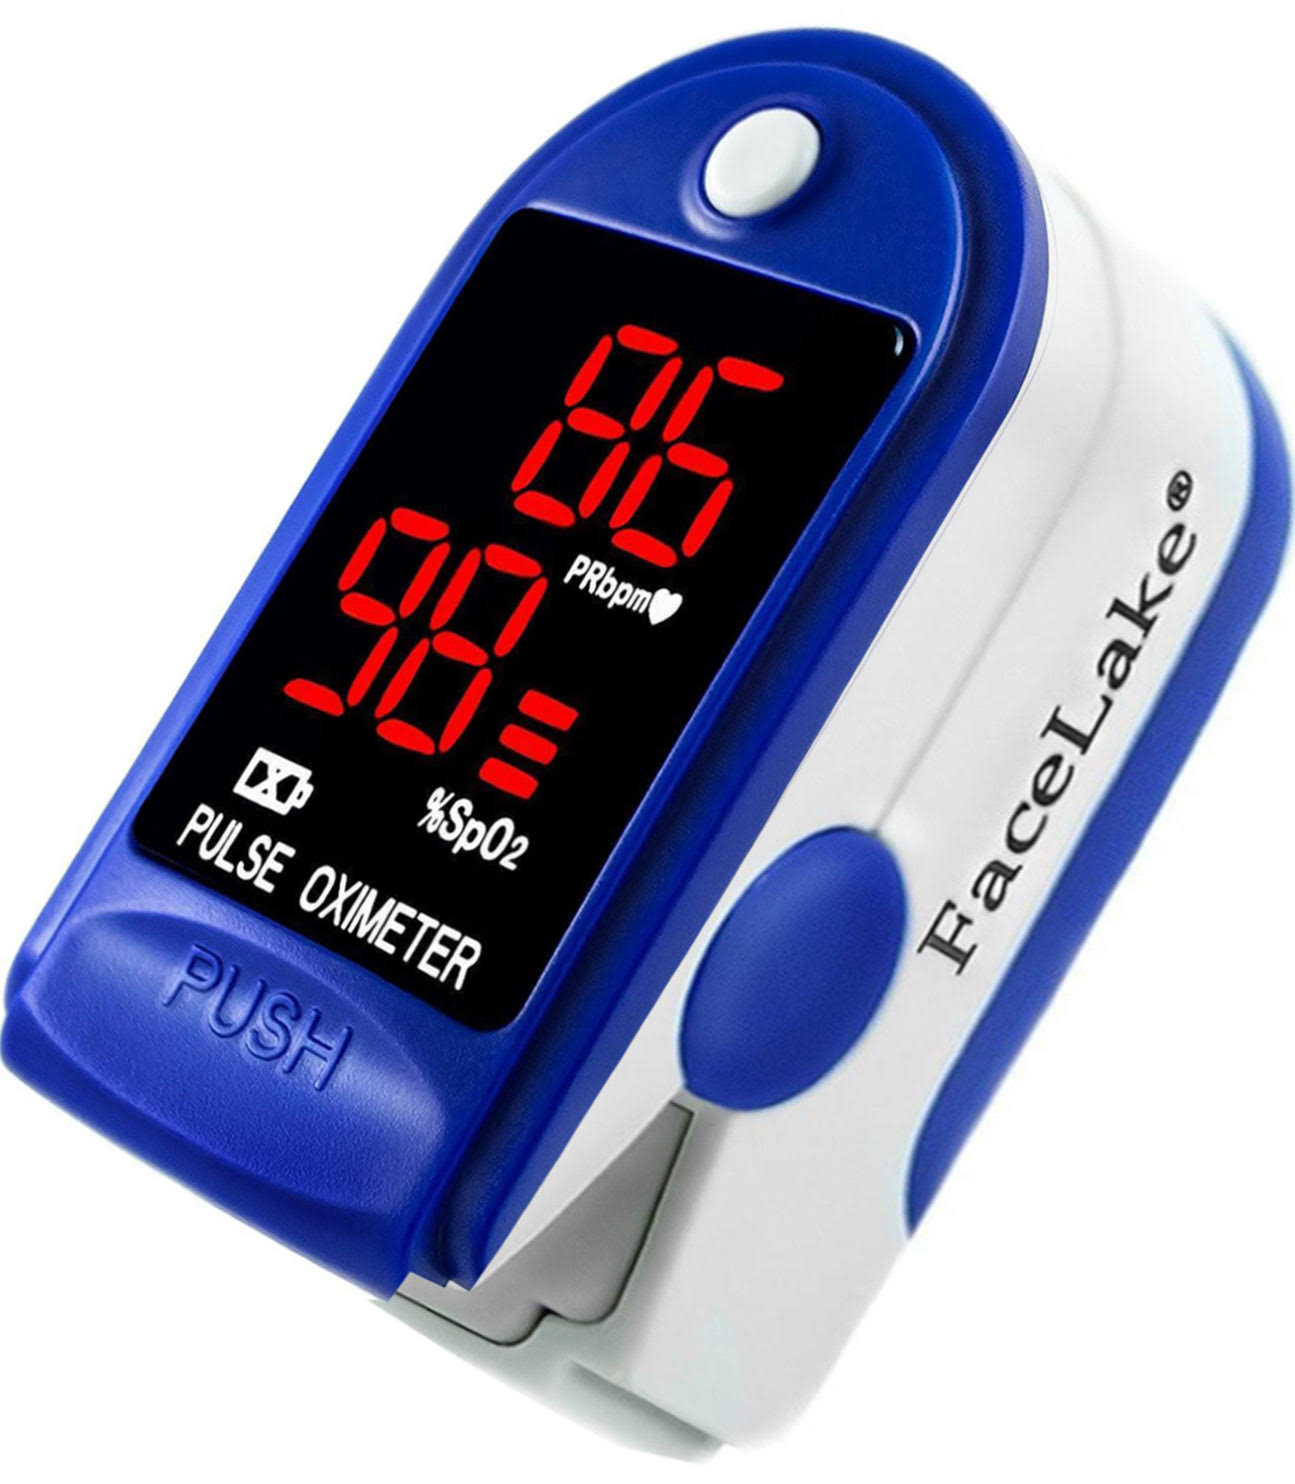 Facelake Fl400 Pulse Oximeter with Neck/wrist Cord, Carrying Case and